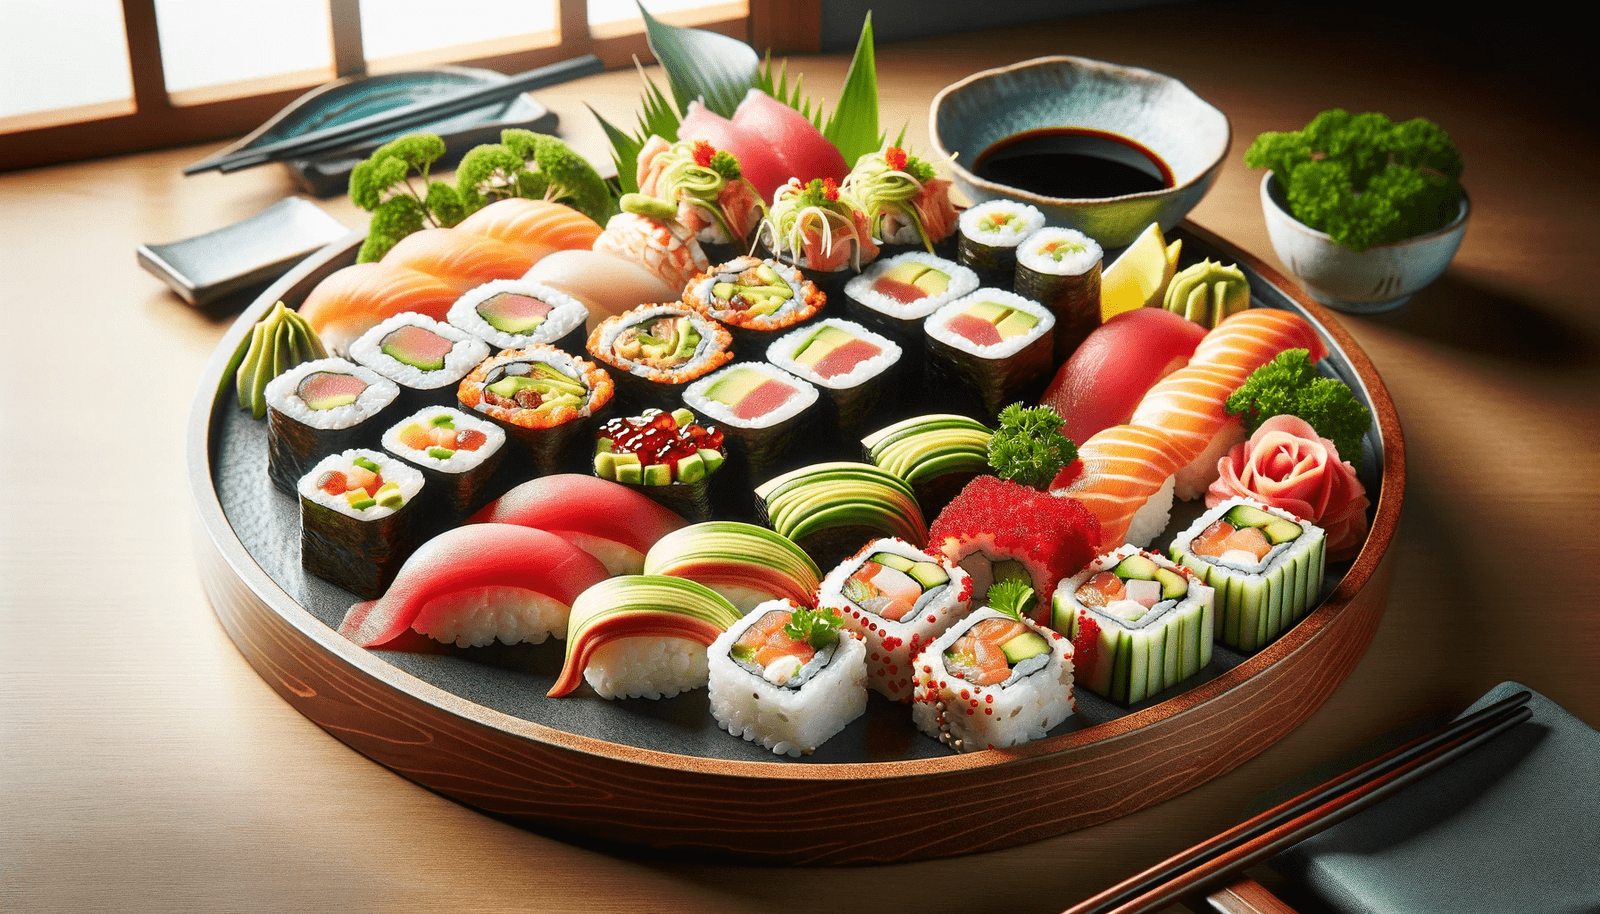 A stunning image of an assortment of maki sushi rolls on a platter — a culinary delight.